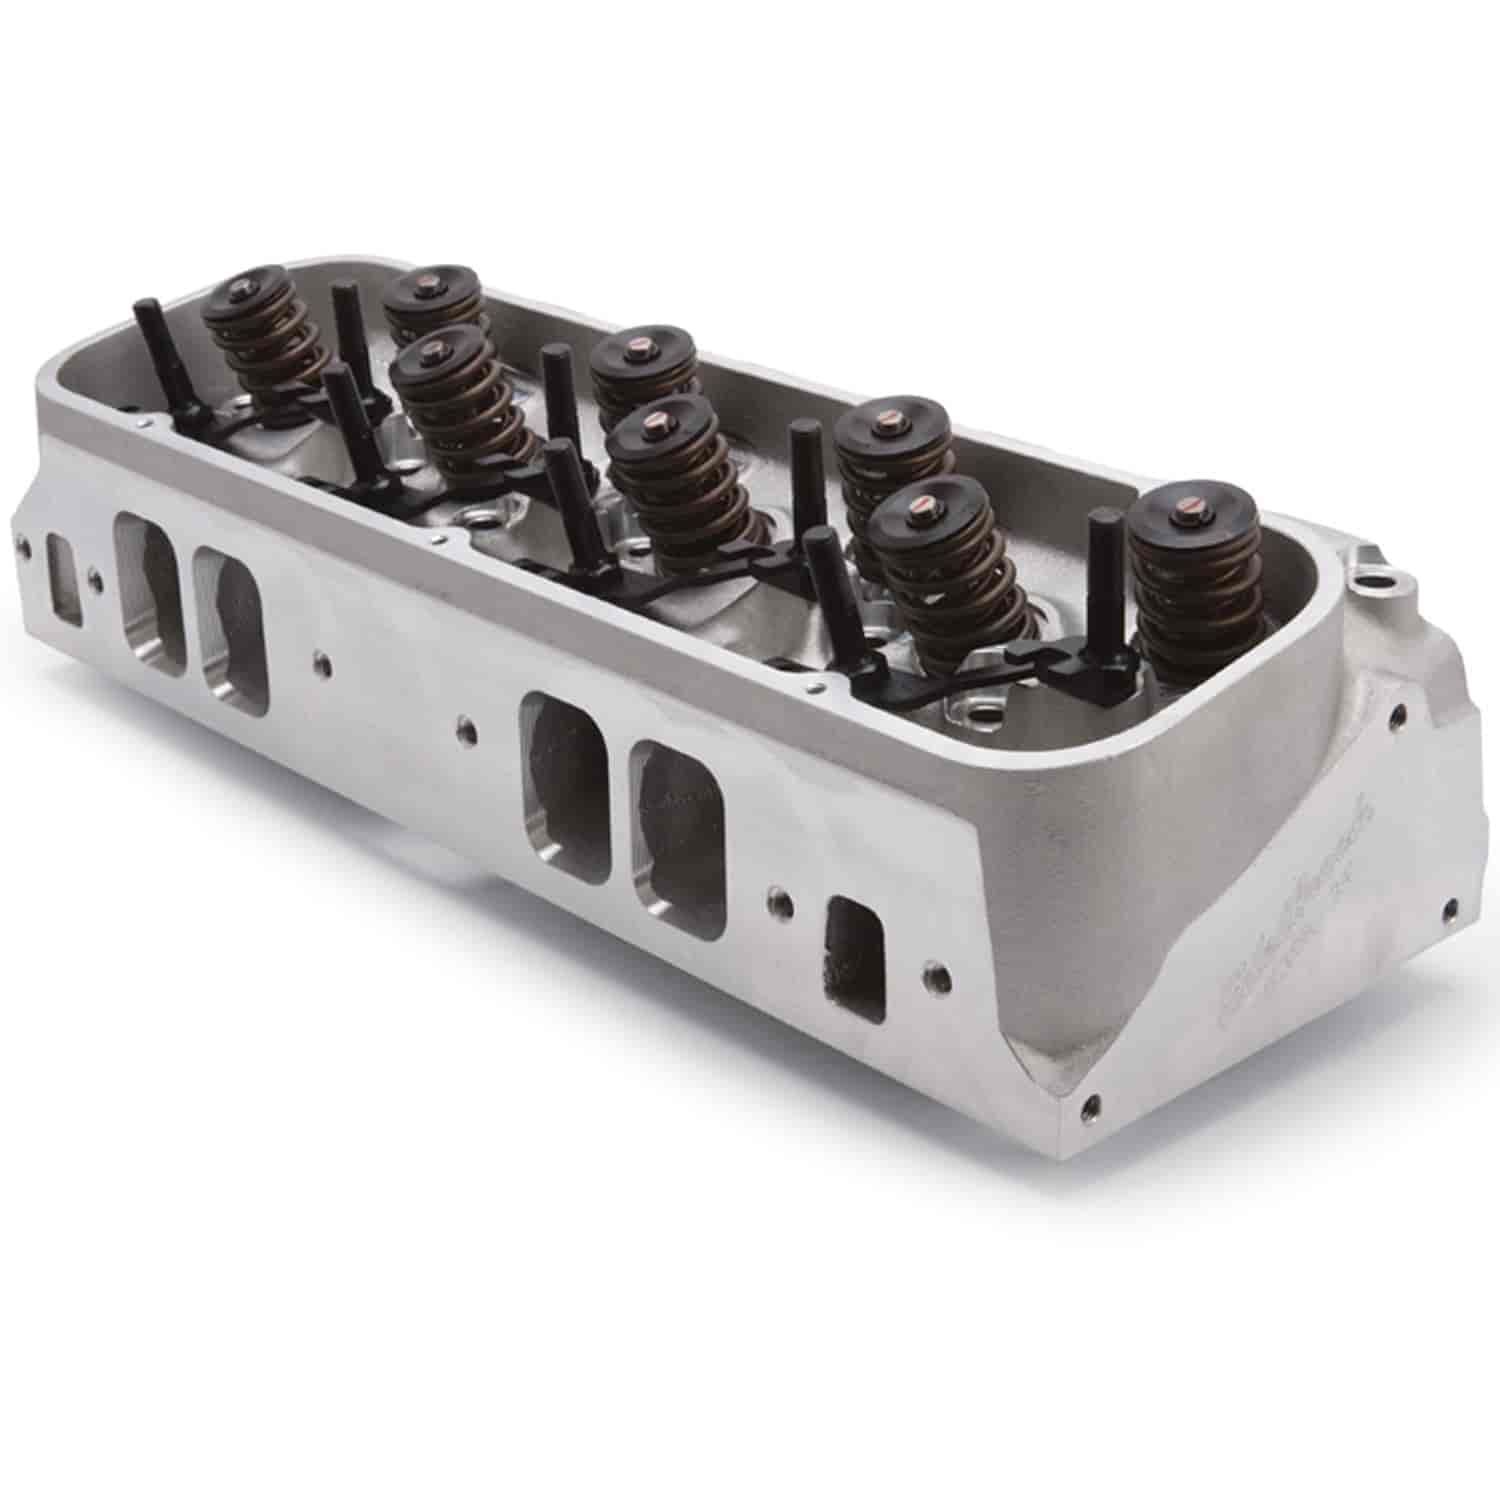 Victor 24° Aluminum Cylinder Head for Big Block Chevy